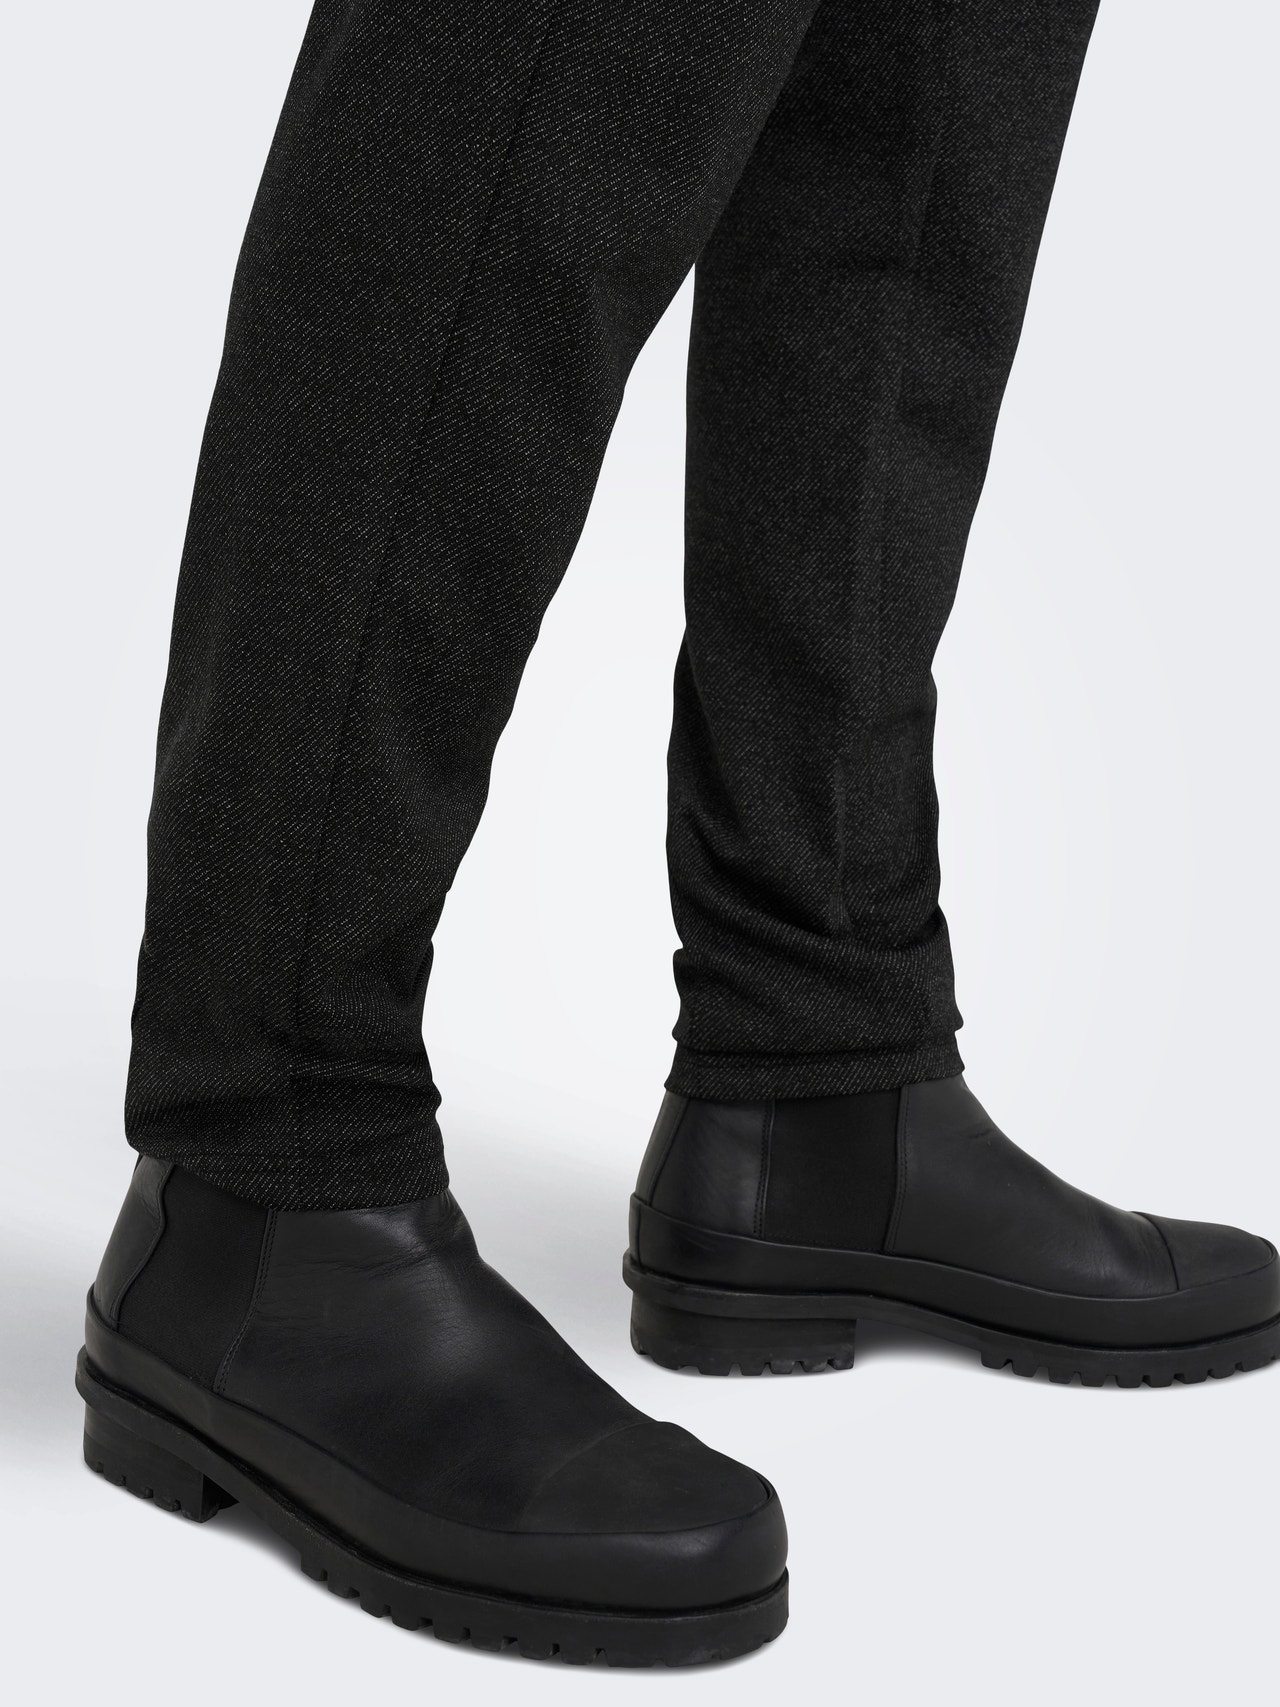 ONLY & SONS Tapered Fit Chinos -Black - 22023496